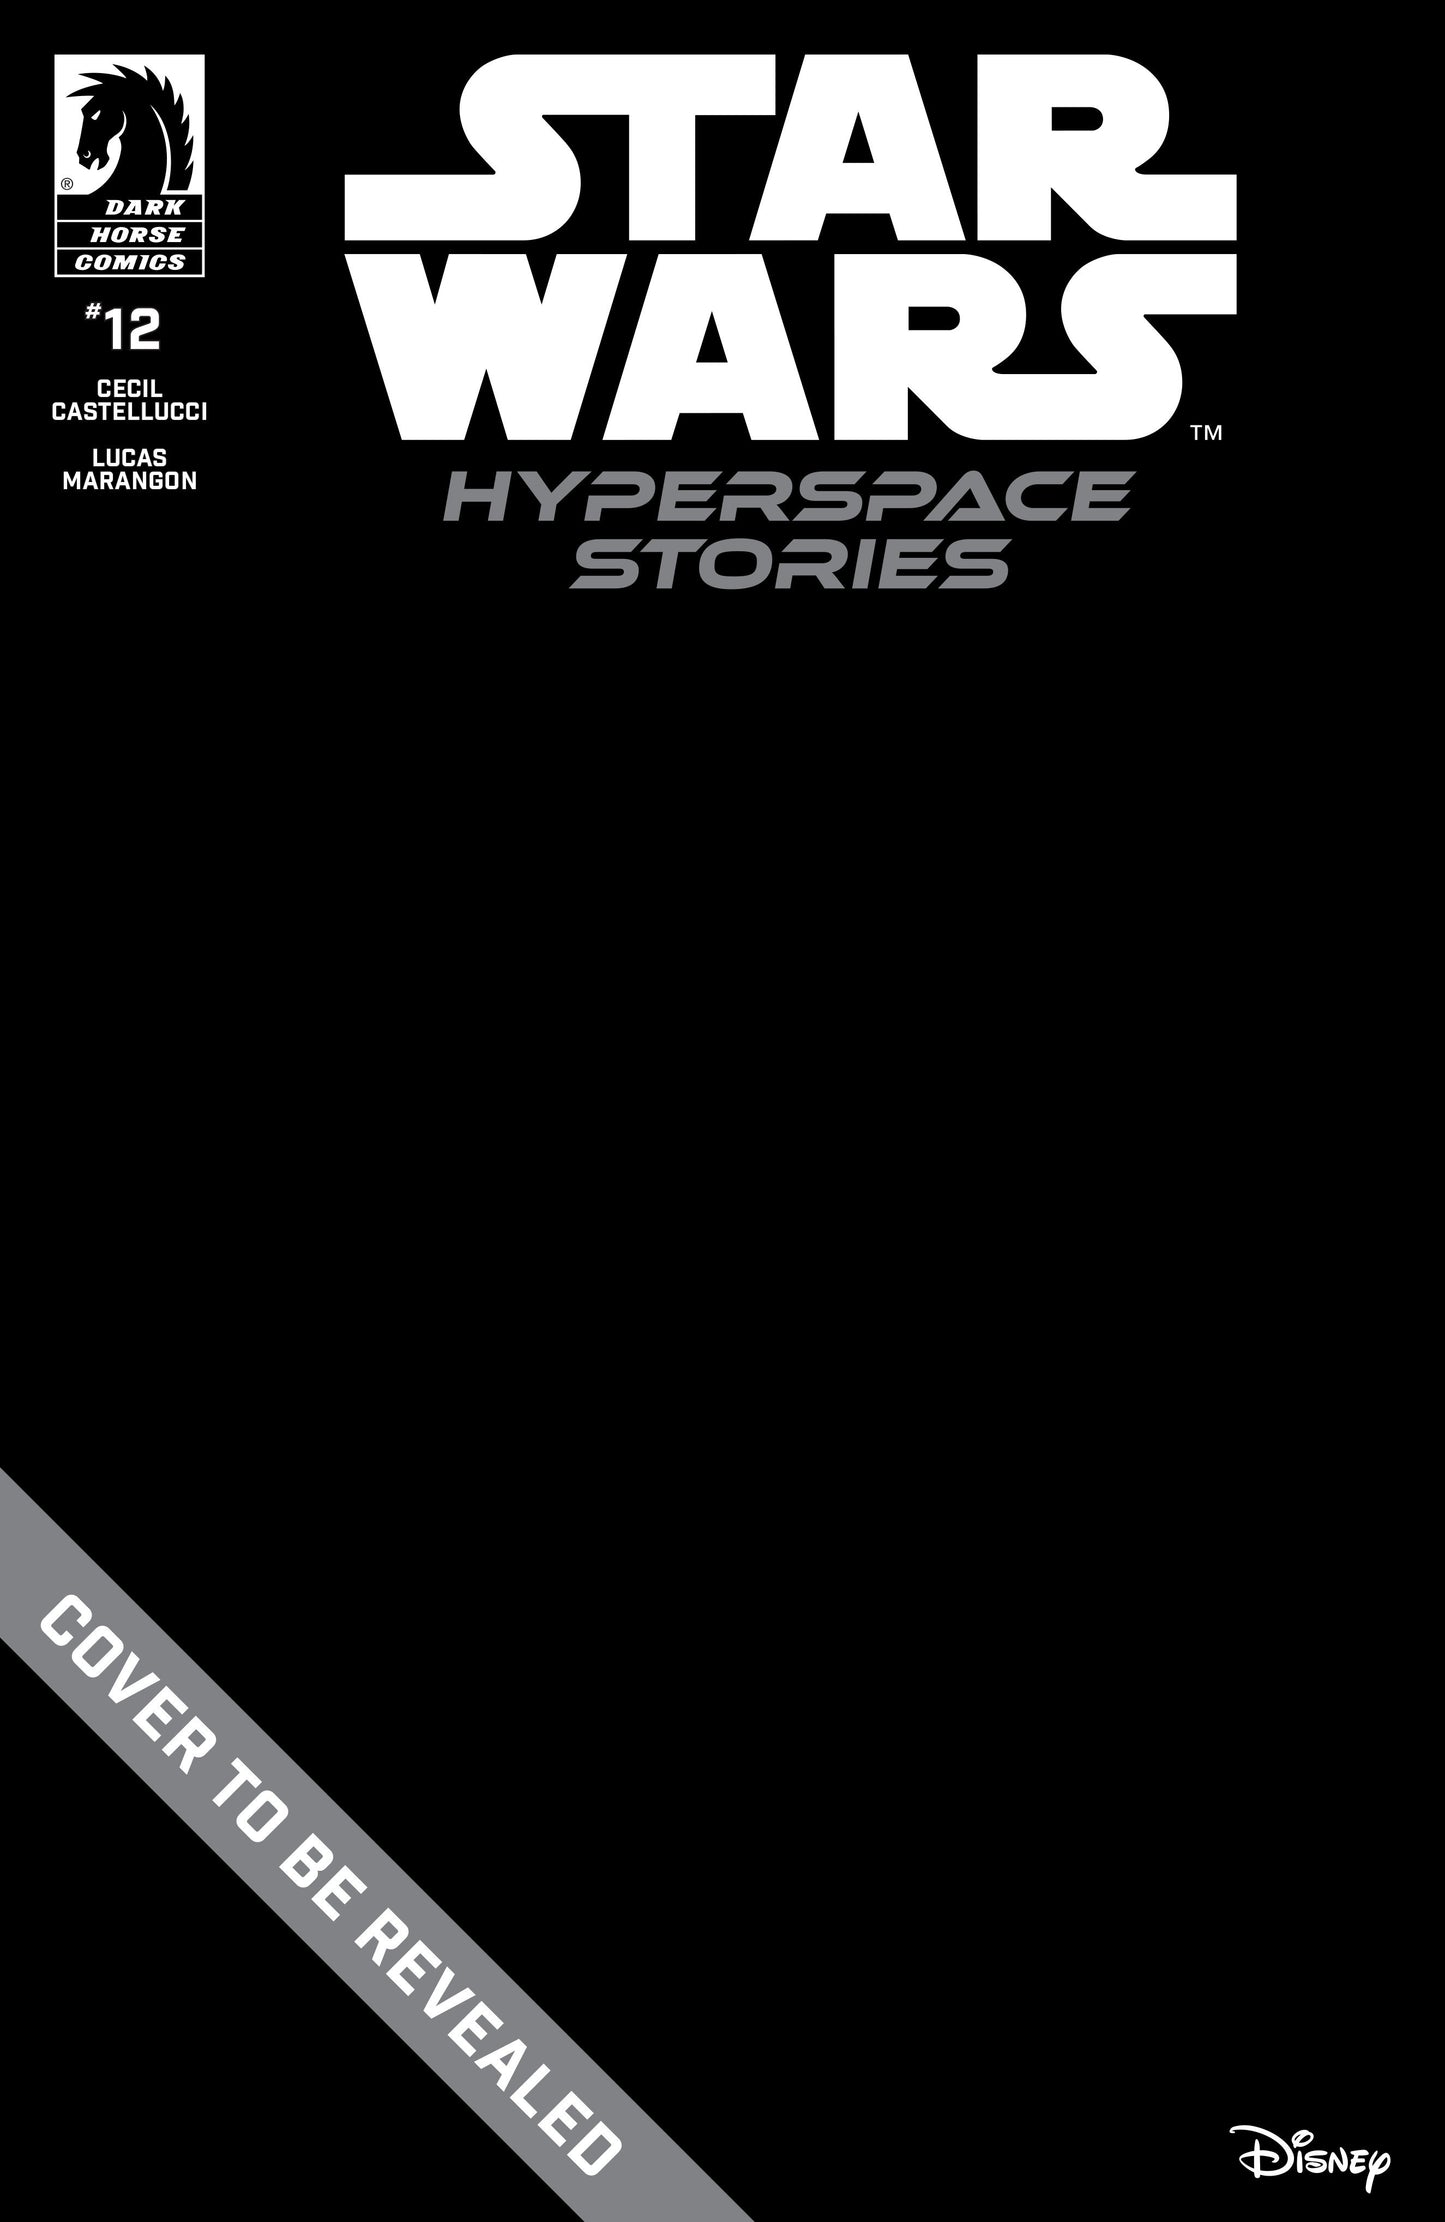 Star Wars: Hyperspace Stories #12 (CVR B) (Cary Nord) - Release Date:  12/13/23